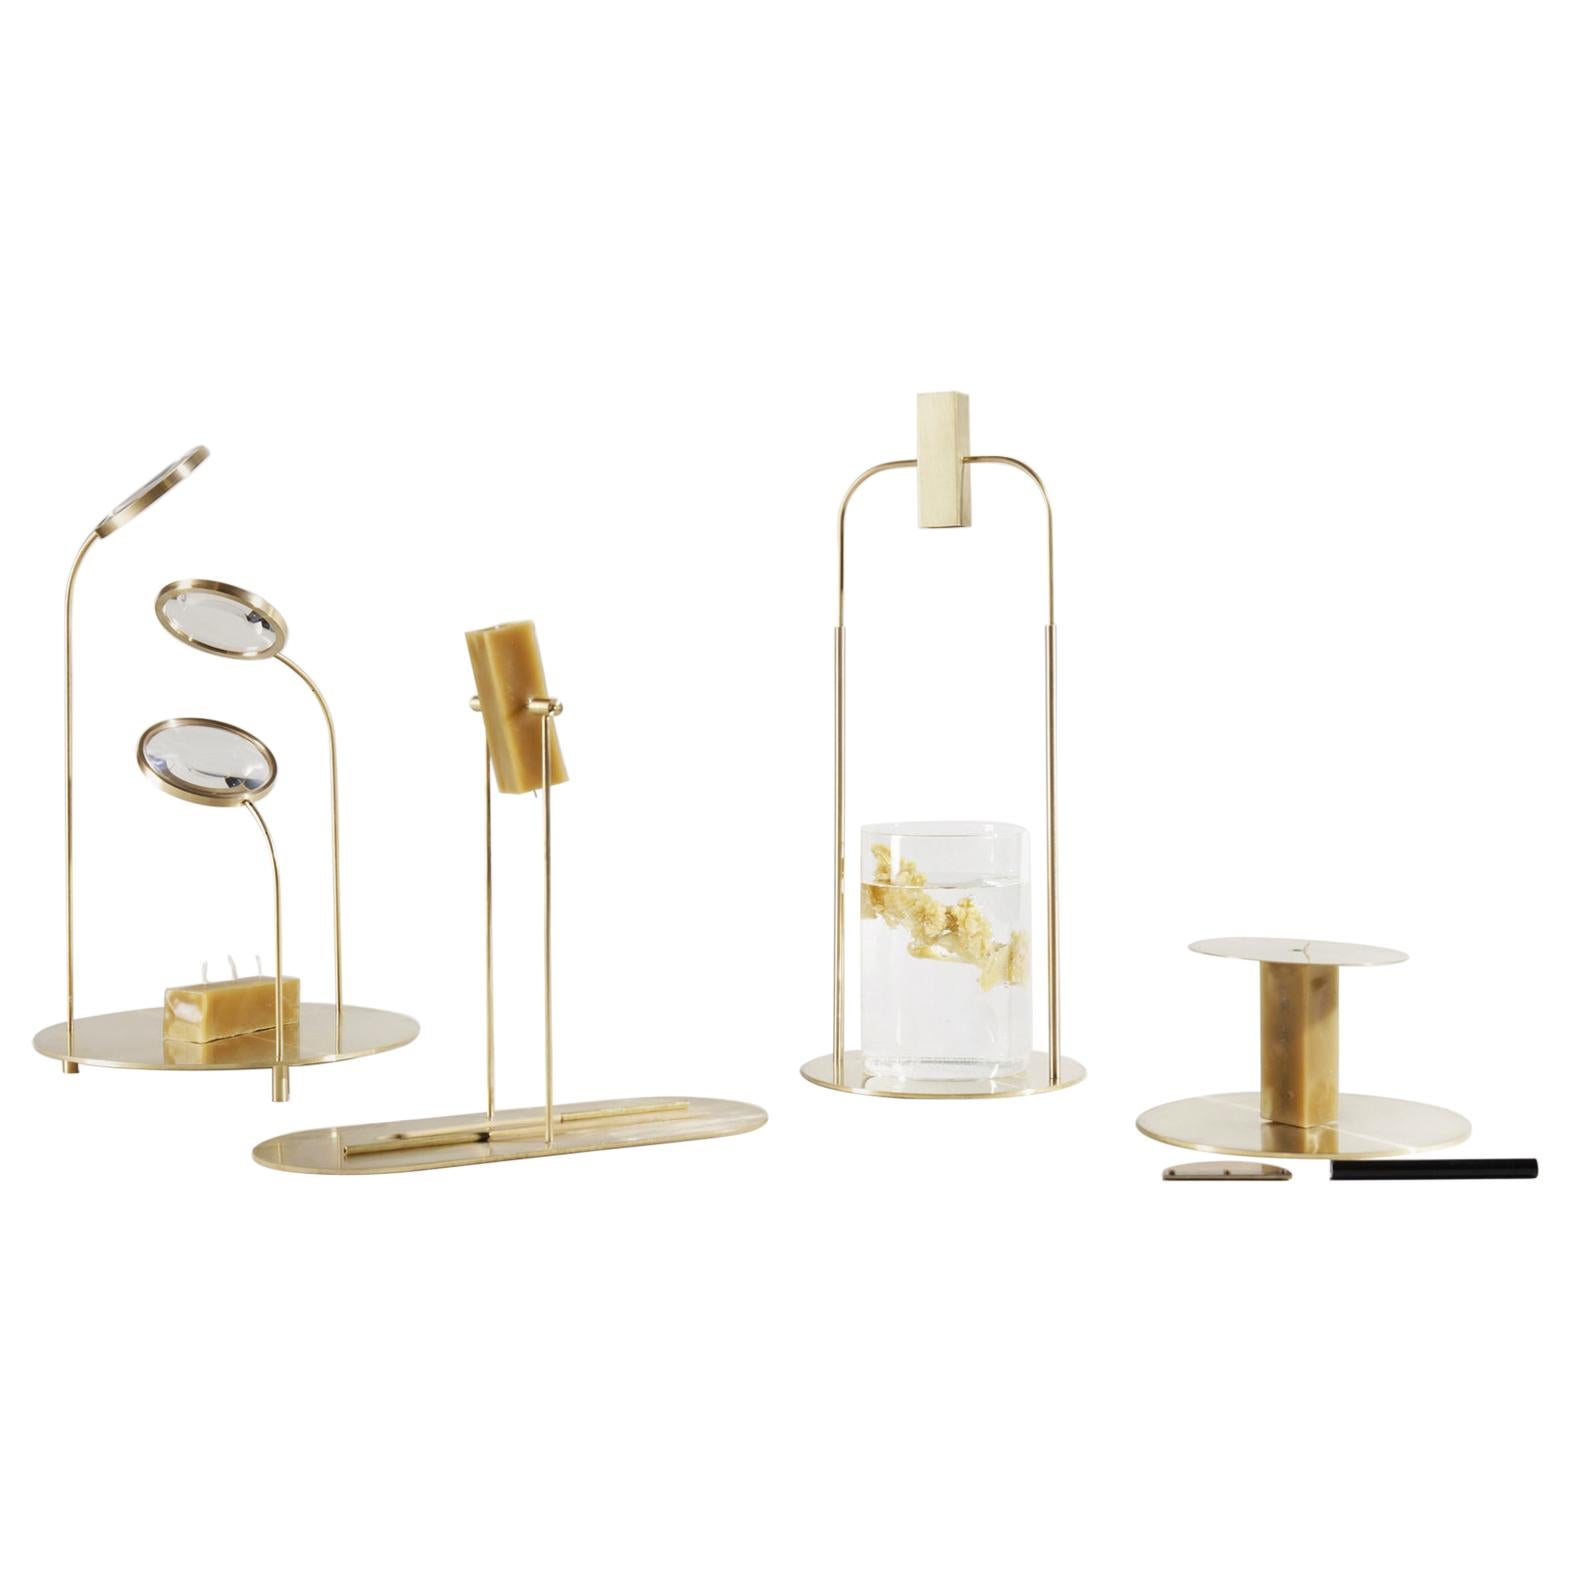 Relativistic Objects Contemporary Light Accessories For Sale